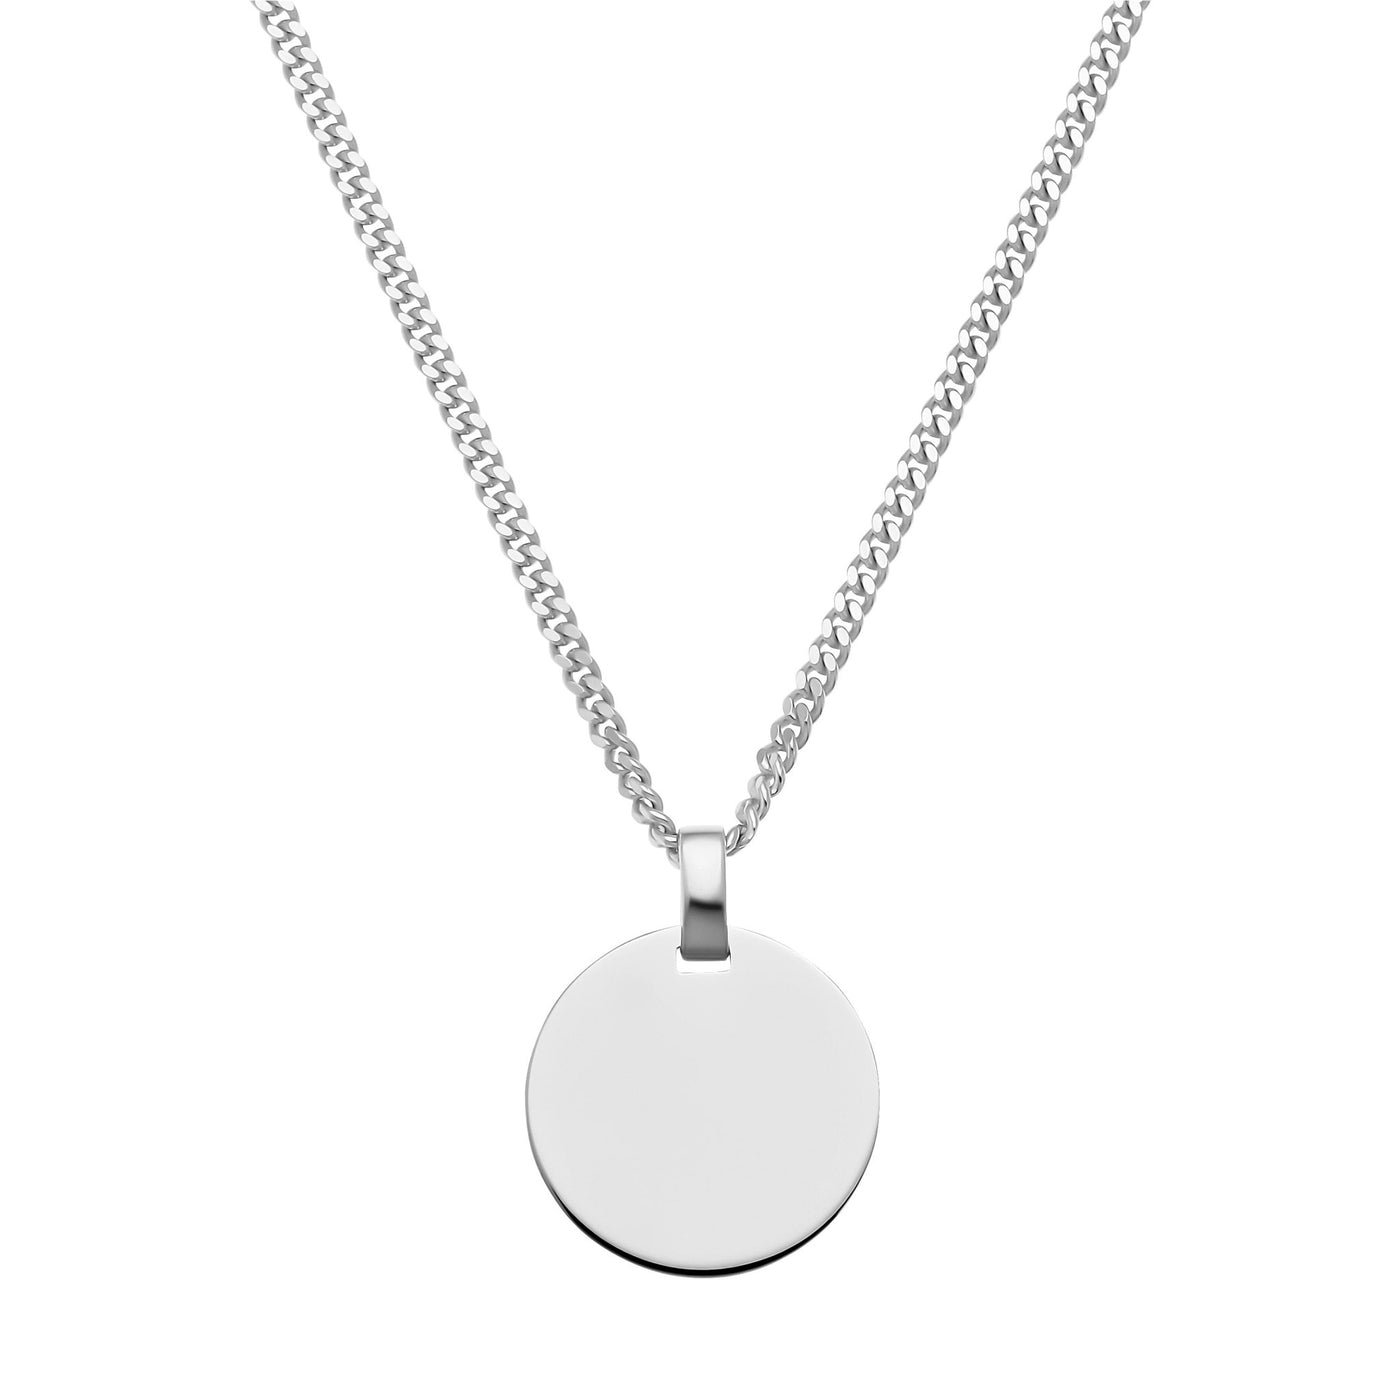 ENGRAVING PLATE ROUND NECKLACE 925 SILVER RHODIUM PLATED - IDENTIM®